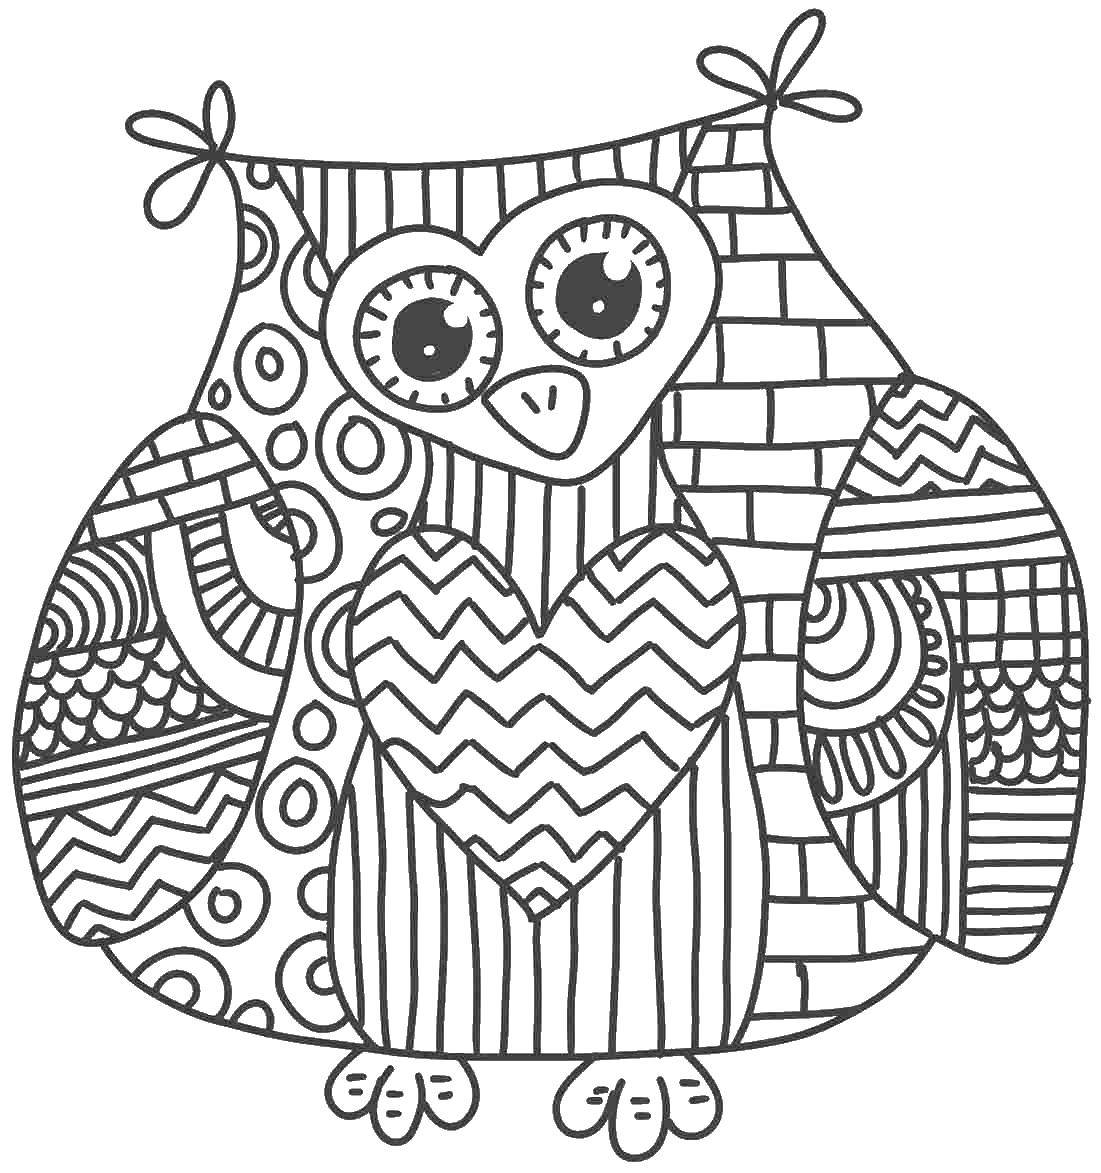 Coloring Funny patterned owl. Category coloring antistress. Tags:  Bathroom with shower.